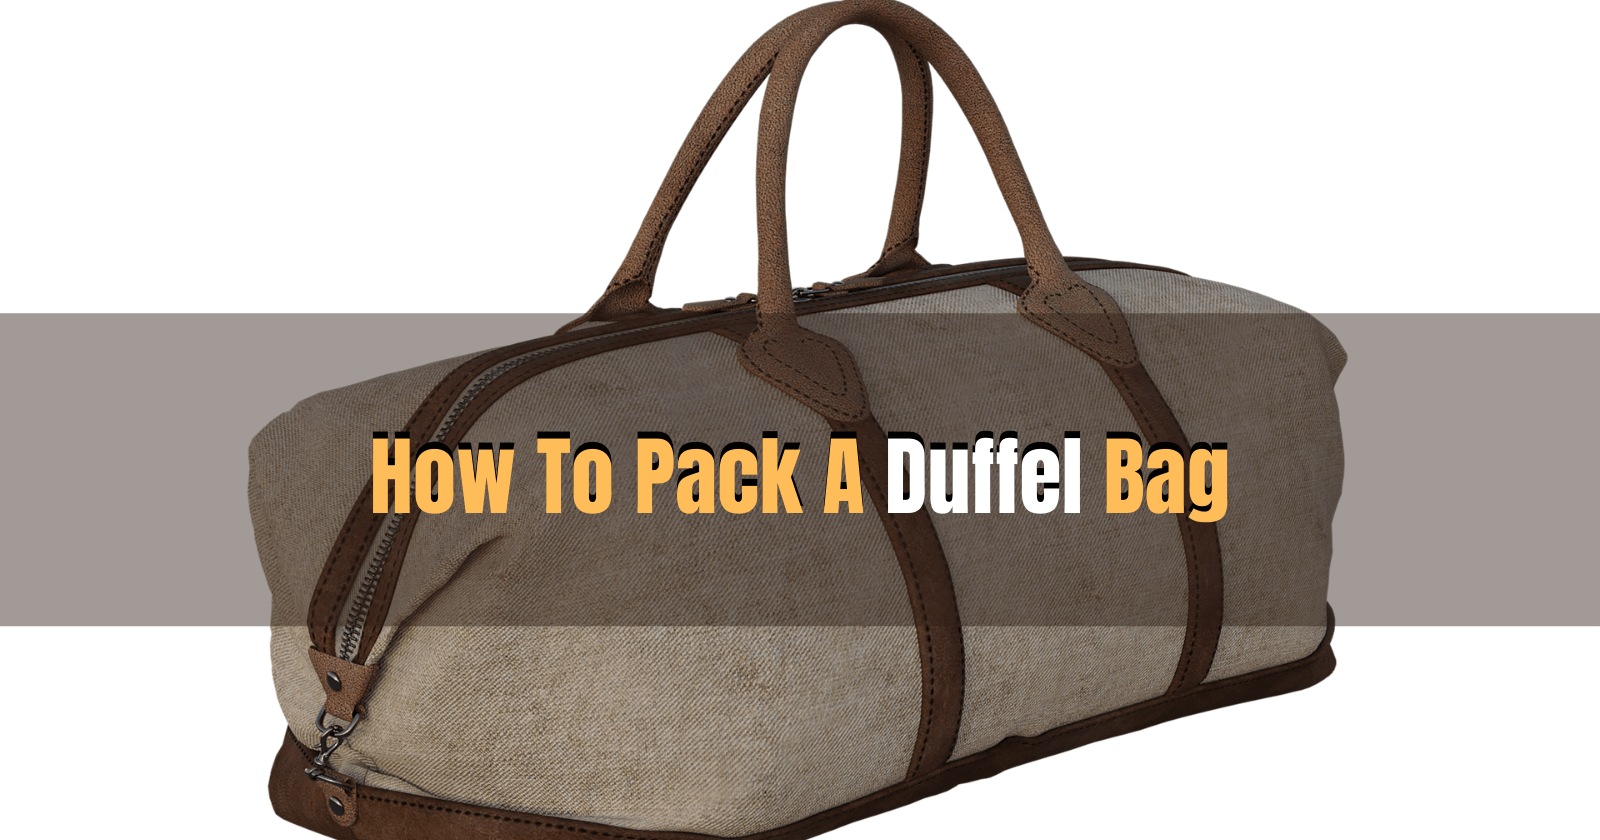 How To Pack A Duffel Bag